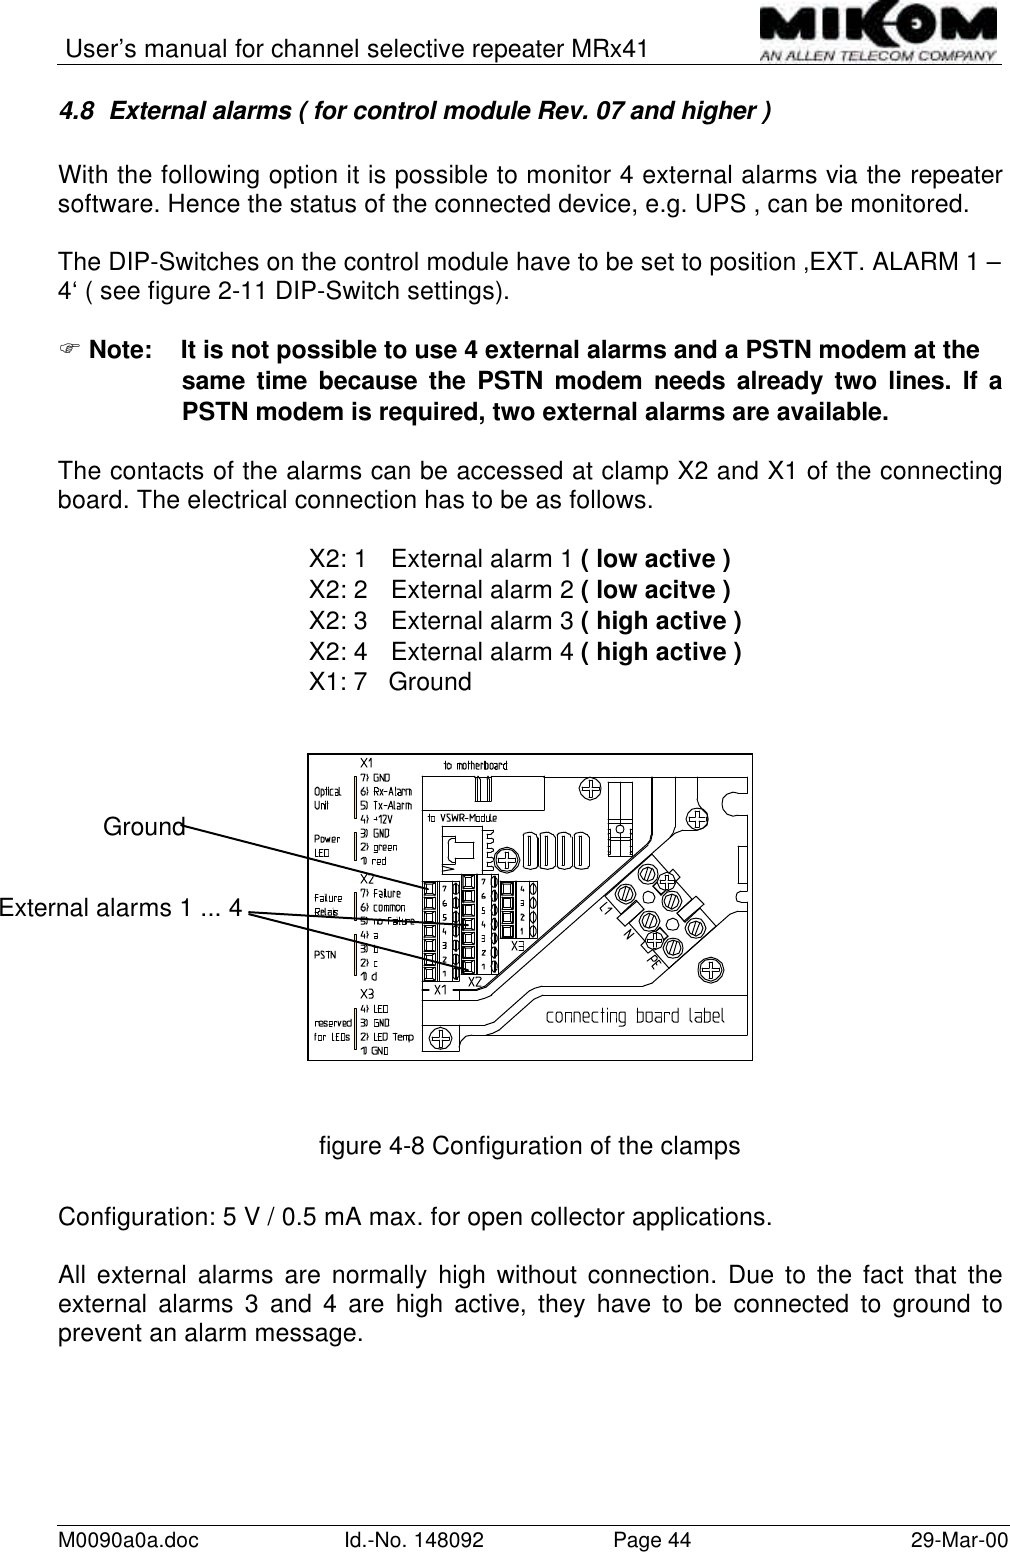 User’s manual for channel selective repeater MRx41M0090a0a.doc Id.-No. 148092 Page 44 29-Mar-004.8 External alarms ( for control module Rev. 07 and higher )With the following option it is possible to monitor 4 external alarms via the repeatersoftware. Hence the status of the connected device, e.g. UPS , can be monitored.The DIP-Switches on the control module have to be set to position ‚EXT. ALARM 1 –4‘ ( see figure 2-11 DIP-Switch settings).F Note: It is not possible to use 4 external alarms and a PSTN modem at thesame time because the PSTN modem needs already two lines. If aPSTN modem is required, two external alarms are available.The contacts of the alarms can be accessed at clamp X2 and X1 of the connectingboard. The electrical connection has to be as follows.X2: 1 External alarm 1 ( low active )X2: 2 External alarm 2 ( low acitve )X2: 3 External alarm 3 ( high active )X2: 4 External alarm 4 ( high active )X1: 7   Groundfigure 4-8 Configuration of the clampsConfiguration: 5 V / 0.5 mA max. for open collector applications.All external alarms are normally high without connection. Due to the fact that theexternal alarms 3 and 4 are high active, they have to be connected to ground toprevent an alarm message.External alarms 1 ... 4Ground